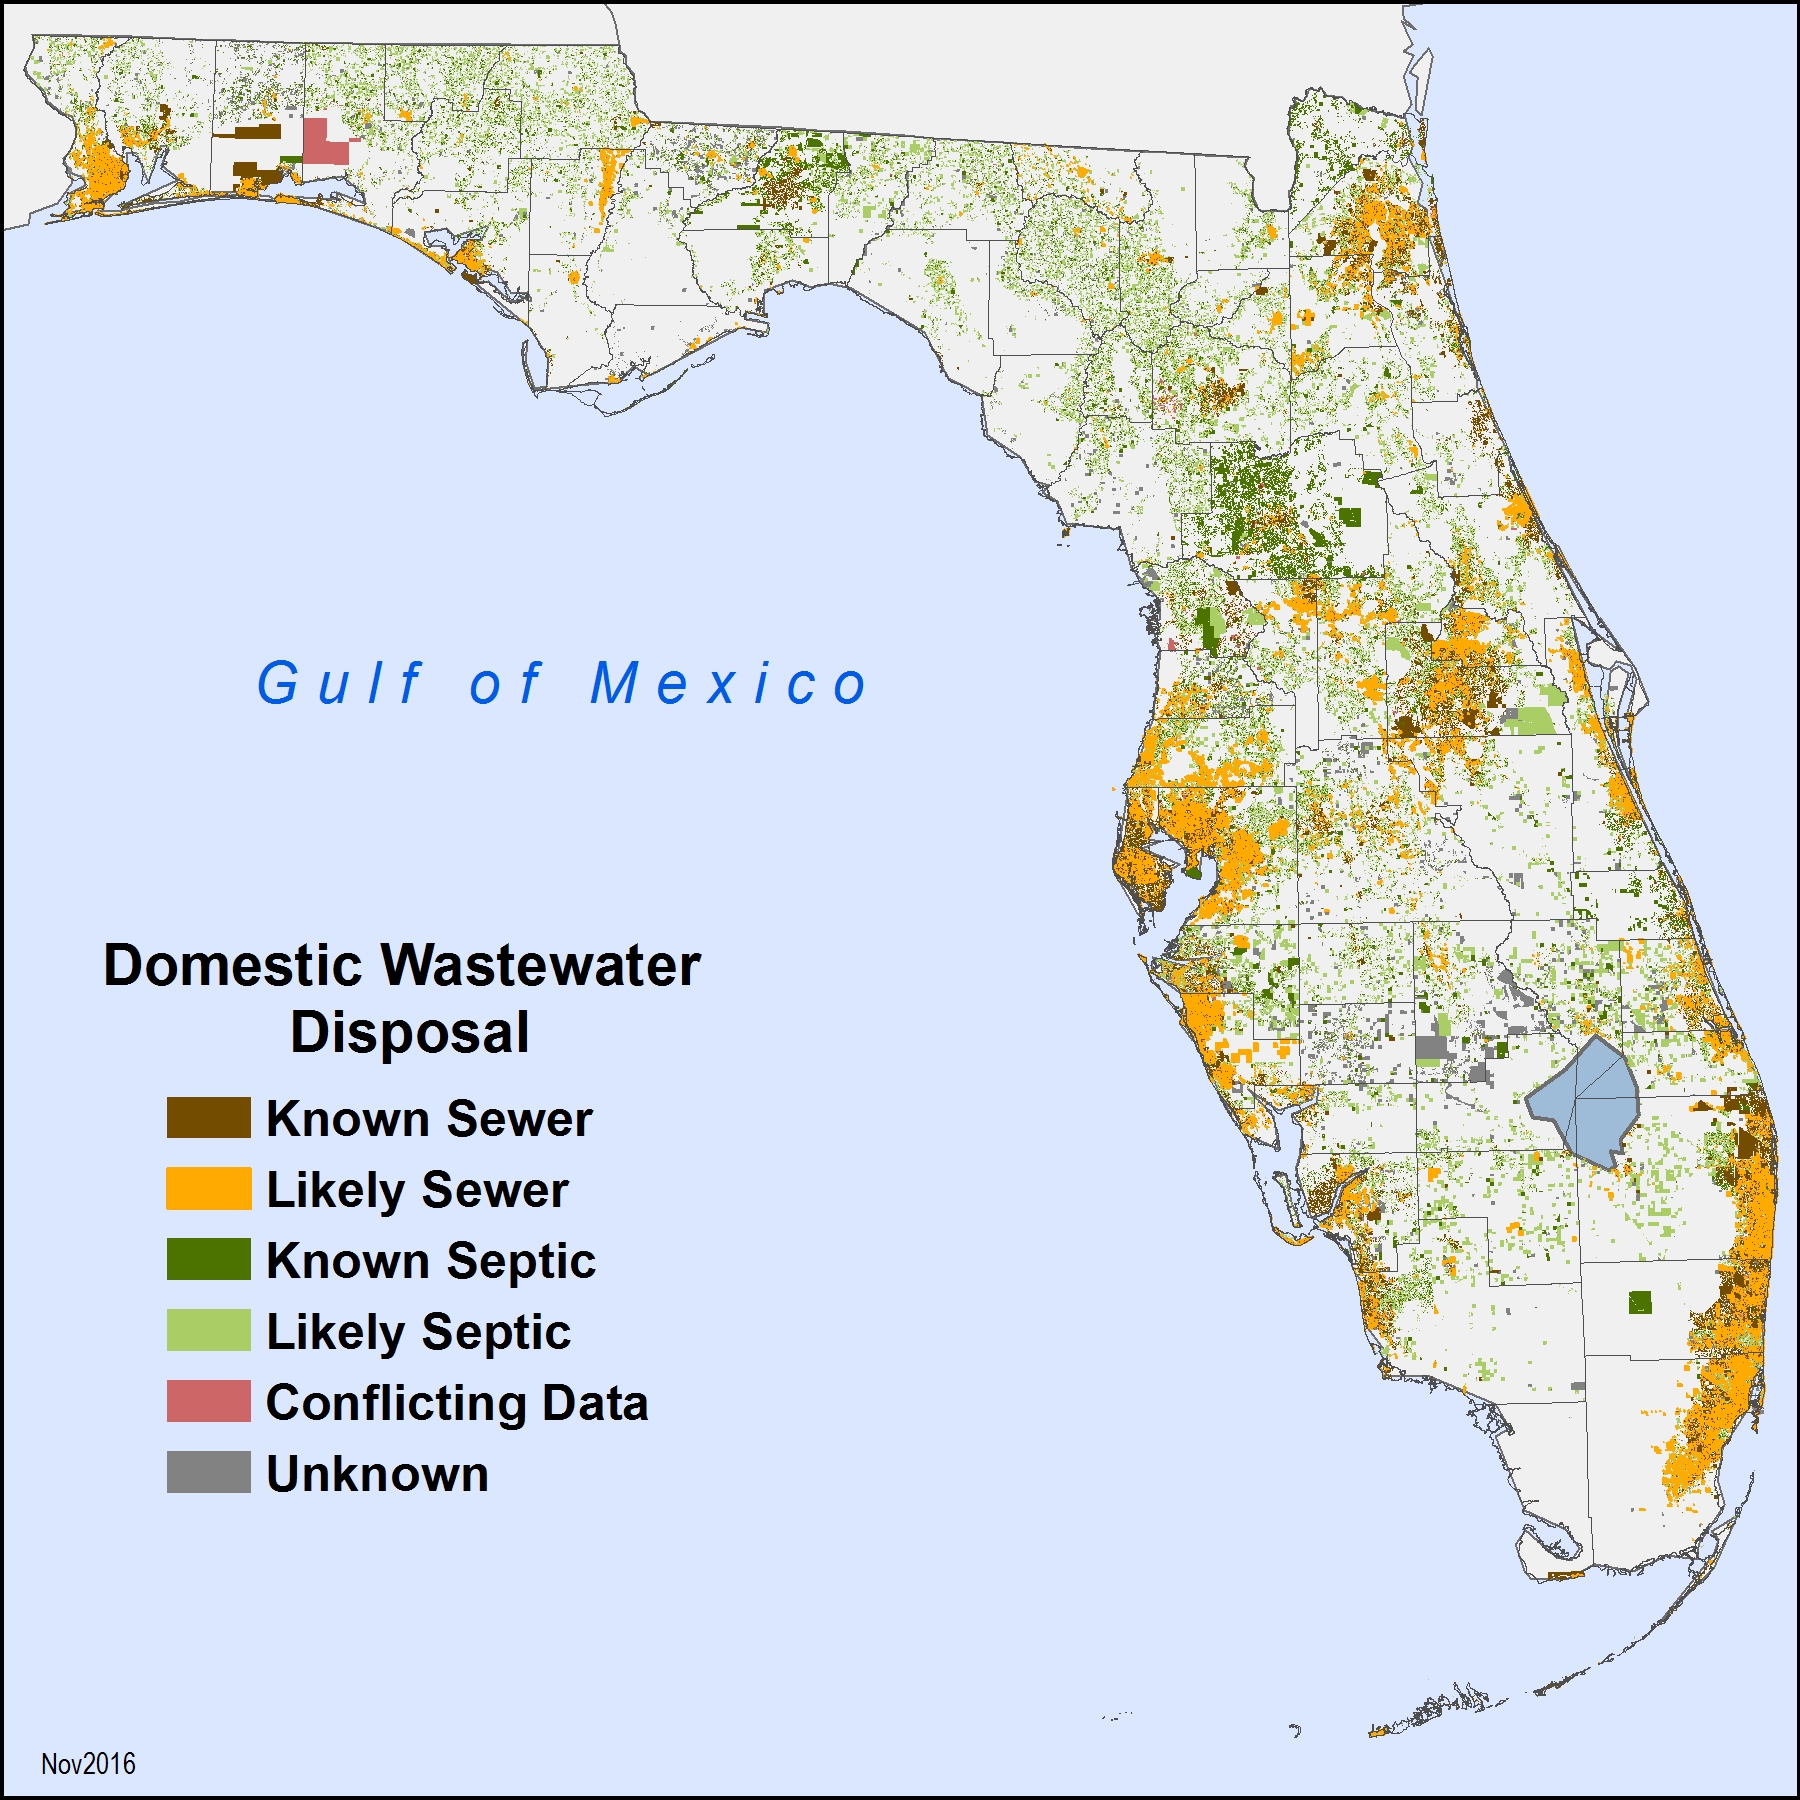 Wastewater Disposal Methods by Property in Florida